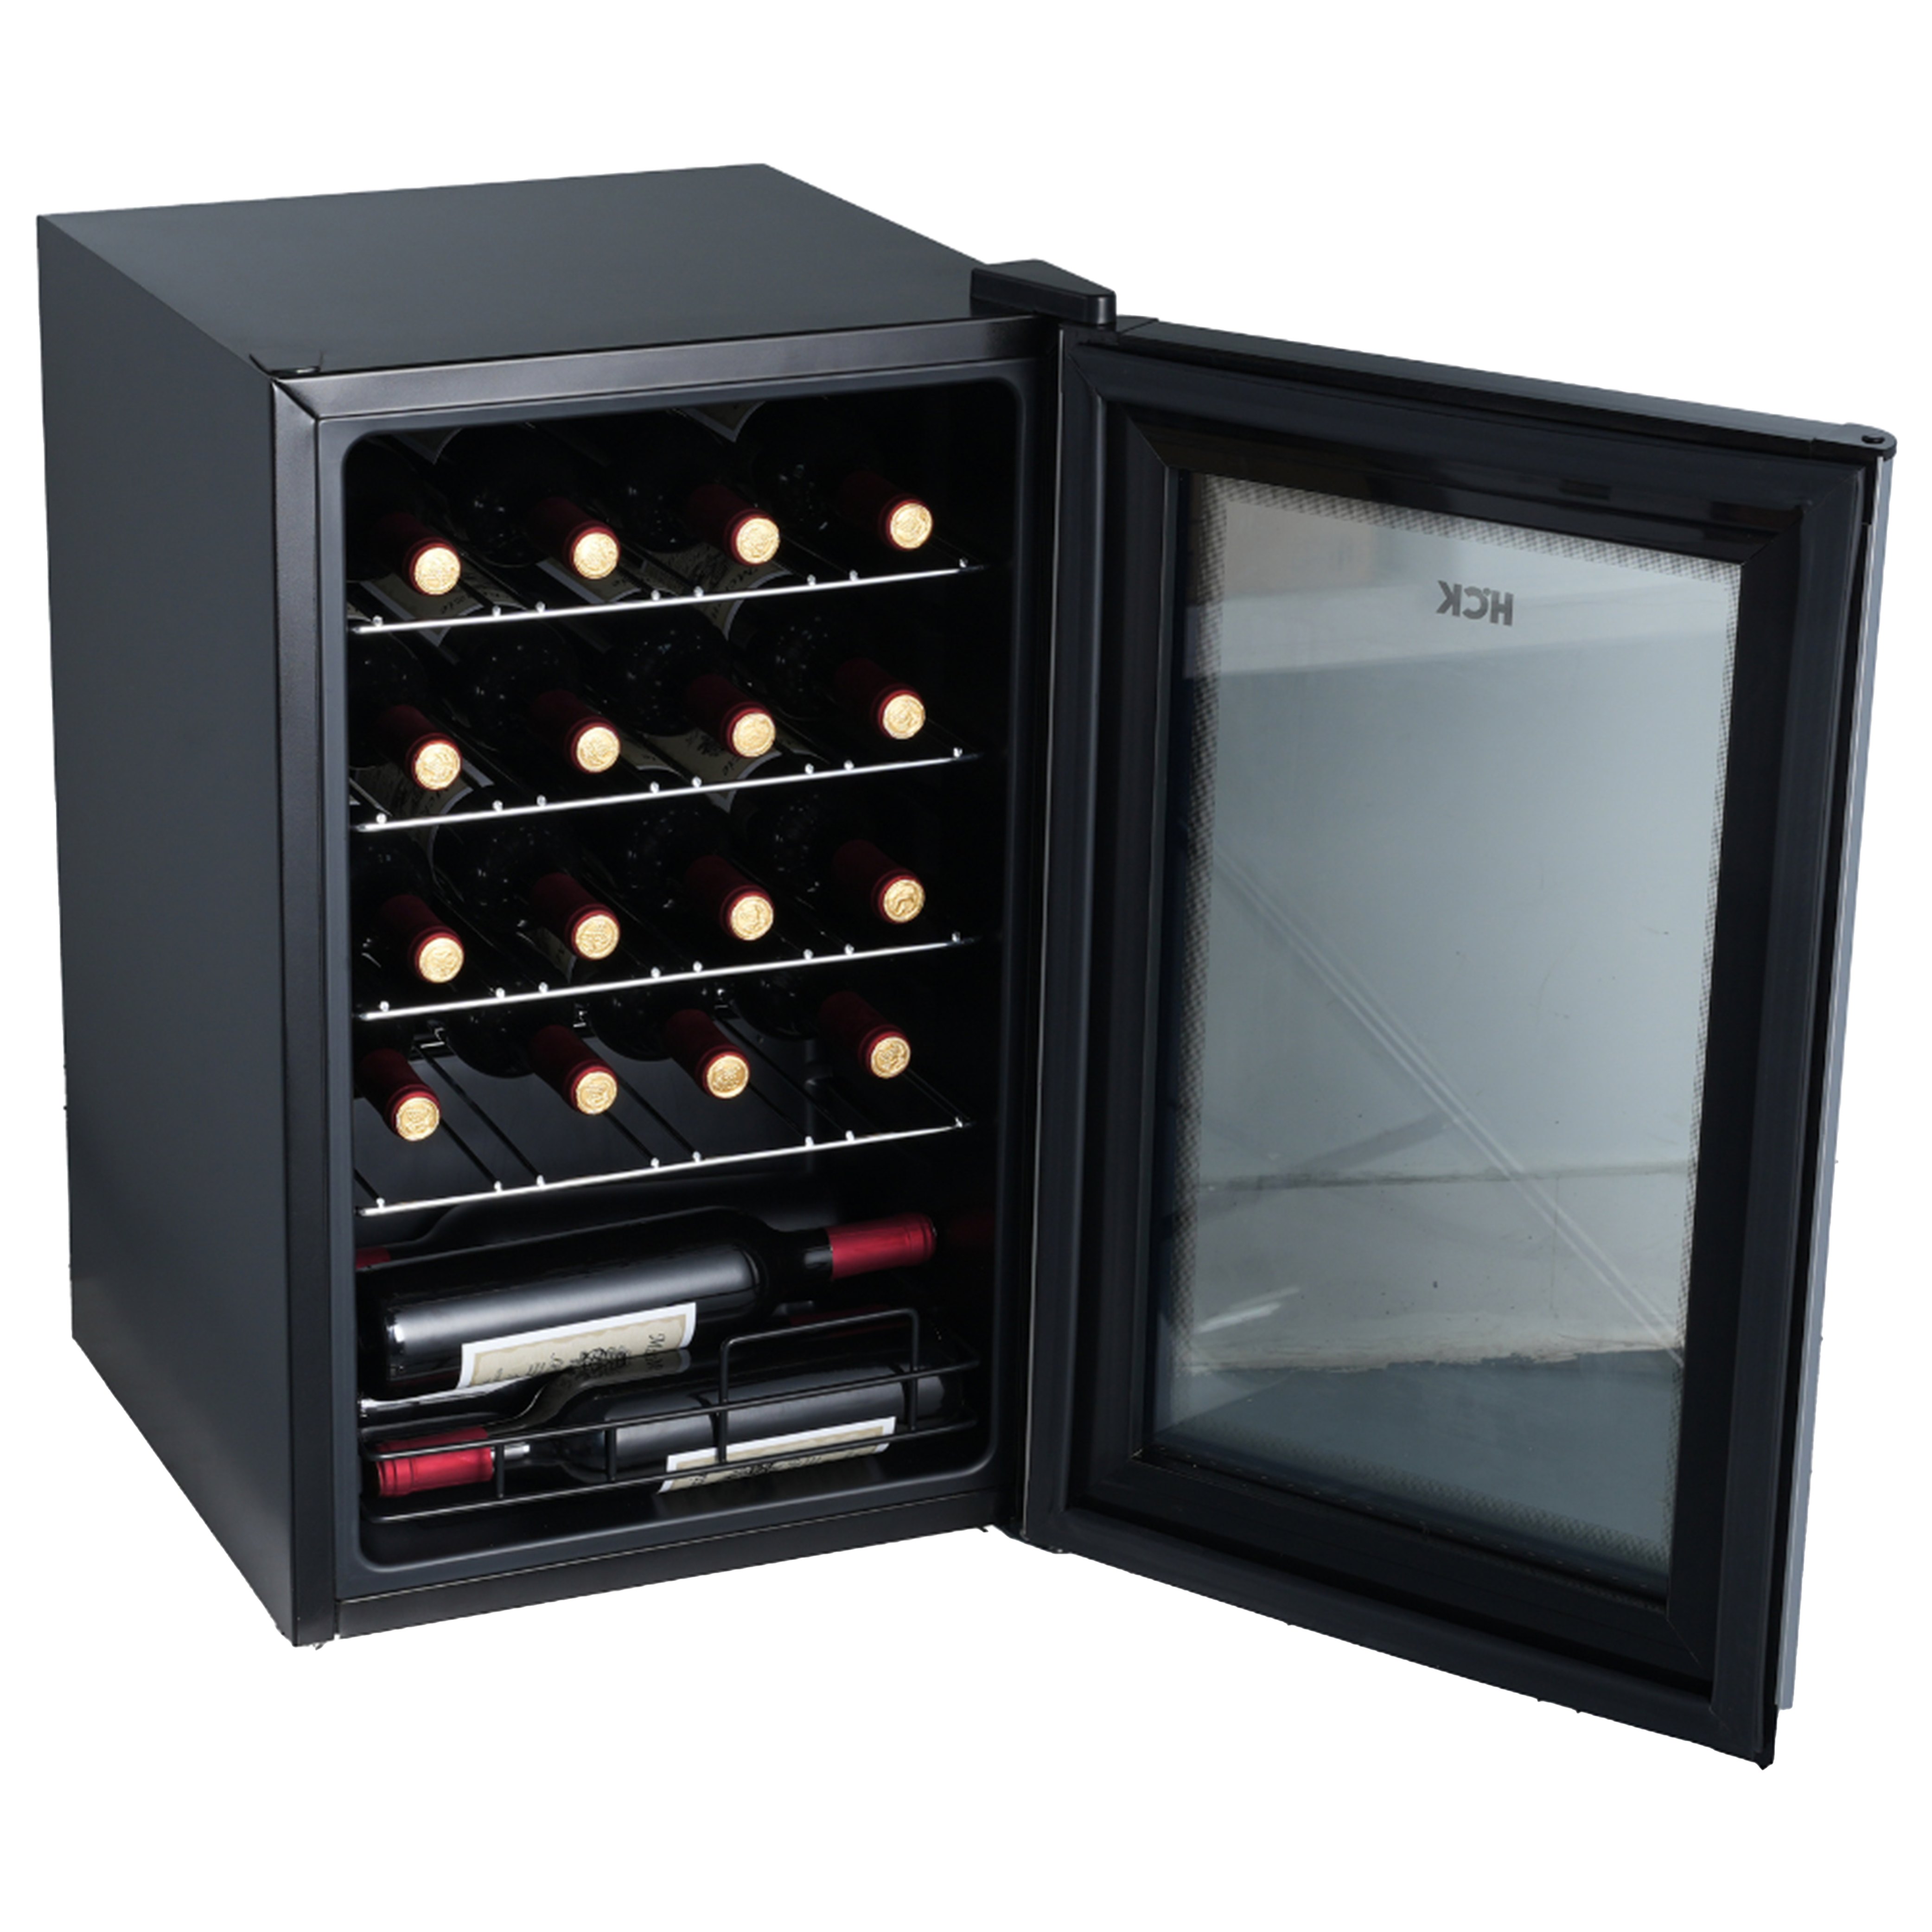 Side view of a 70L Freestanding Dual Zone Wine Fridge 24 Bottles with the door open, showcasing five stainless steel shelves fully stocked with bottles of wine